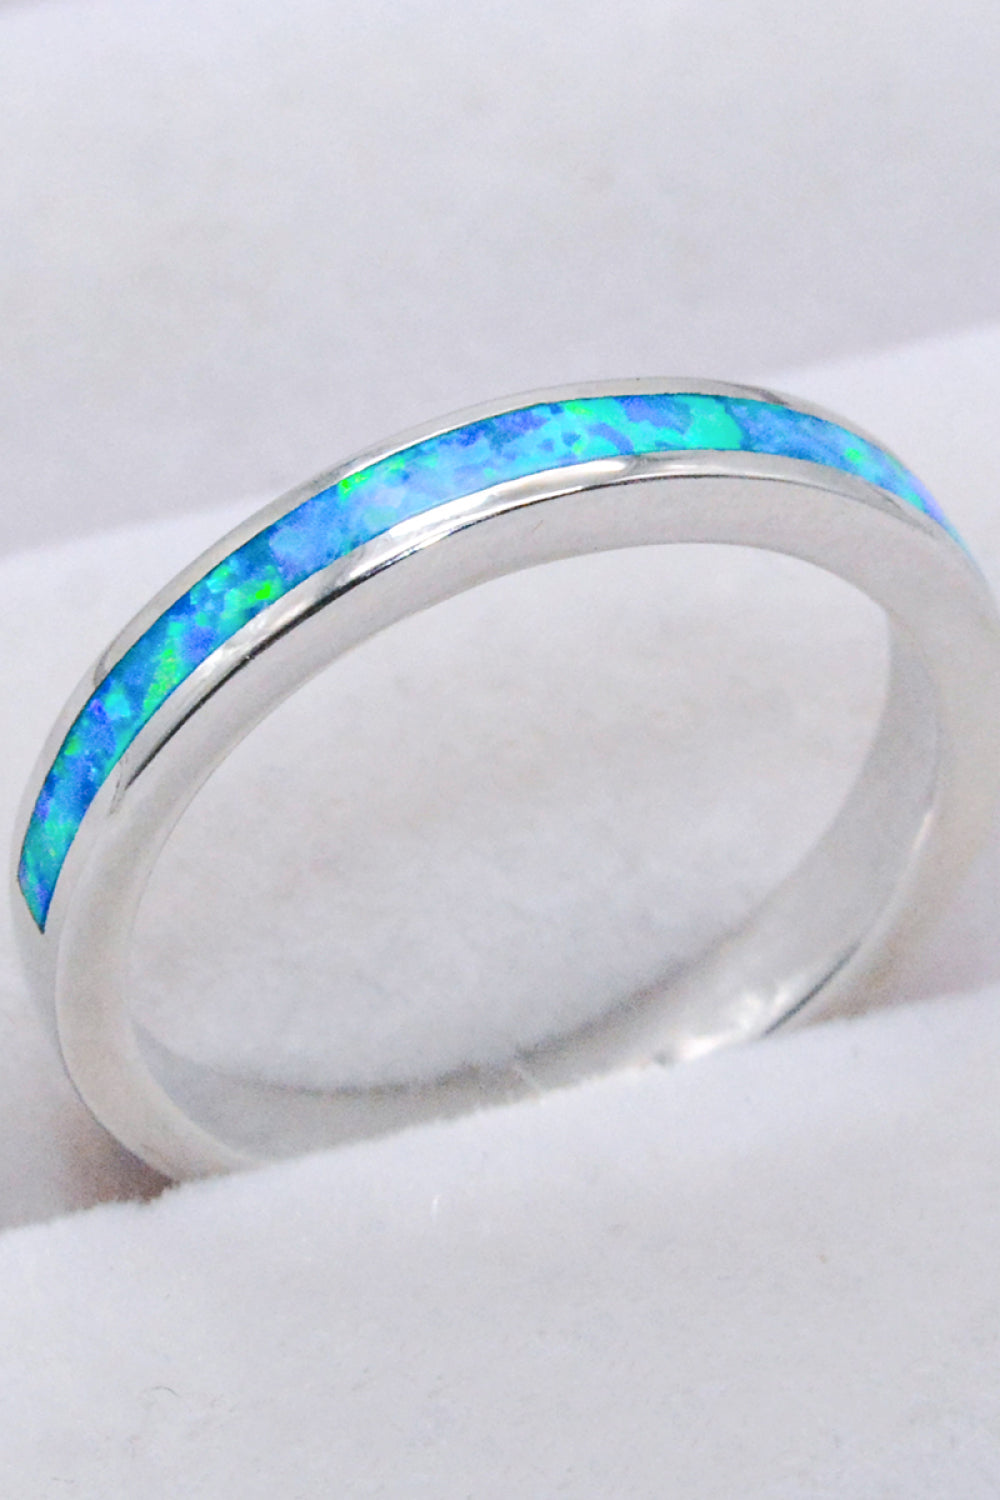 925 Sterling Silver Opal Ring in Sky Blue - Tophatter Shopping Deals - Electronics, Jewelry, Auction, App, Bidding, Gadgets, Fashion